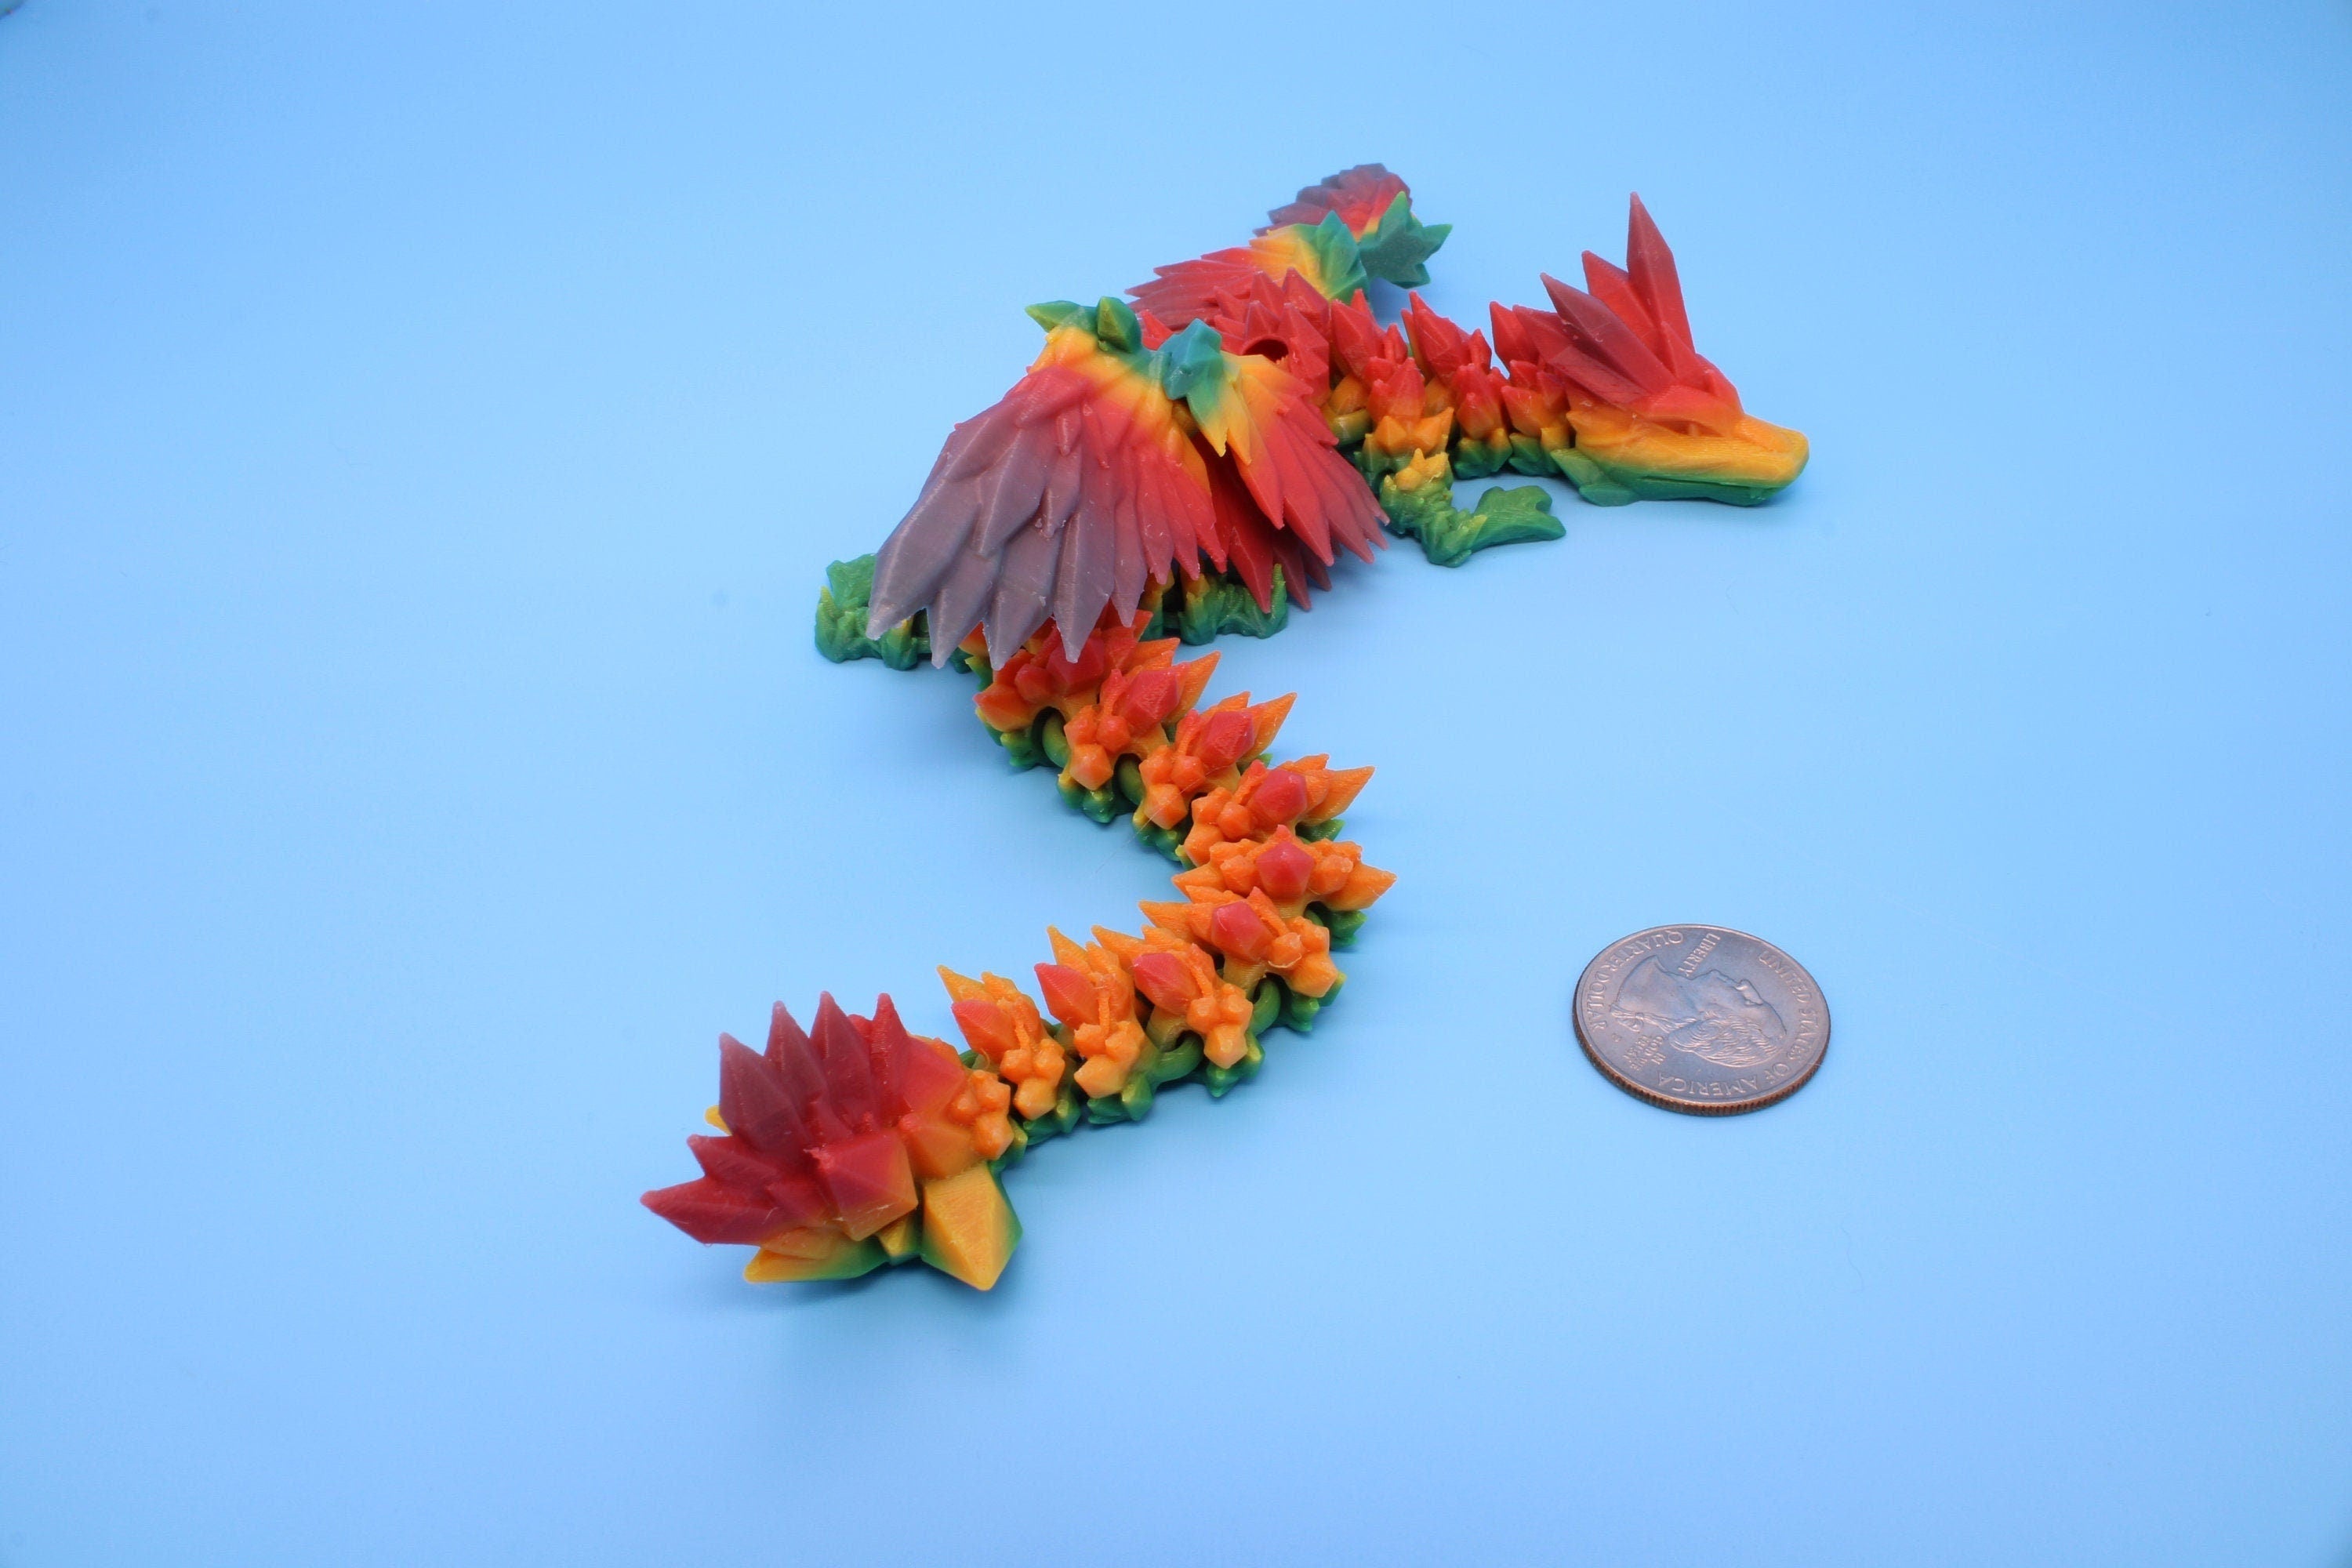 Miniature Rainbow Adult Crystal Winged Dragon | Crystal Wing Dragon 3D printed articulating dragon | Fidget Flexi Toy, 10.5in. Stress Relief